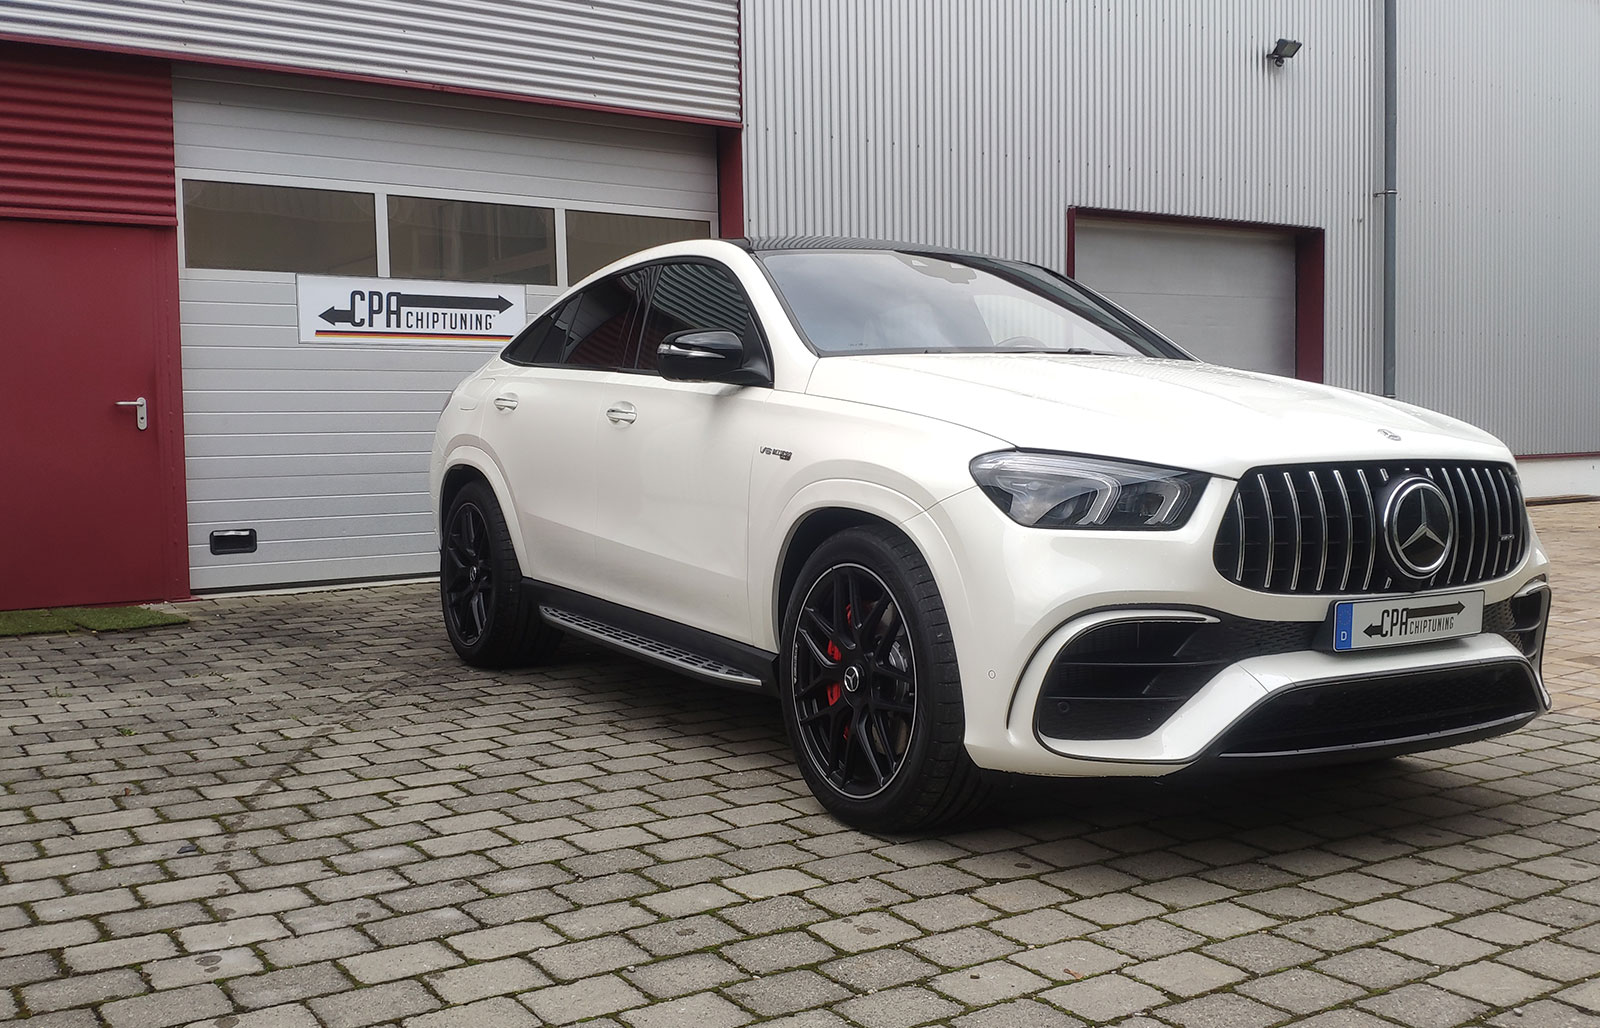 Mercedes GLE-Class (C167) GLE63 S AMG 4MATIC + Coupe チップチューニング